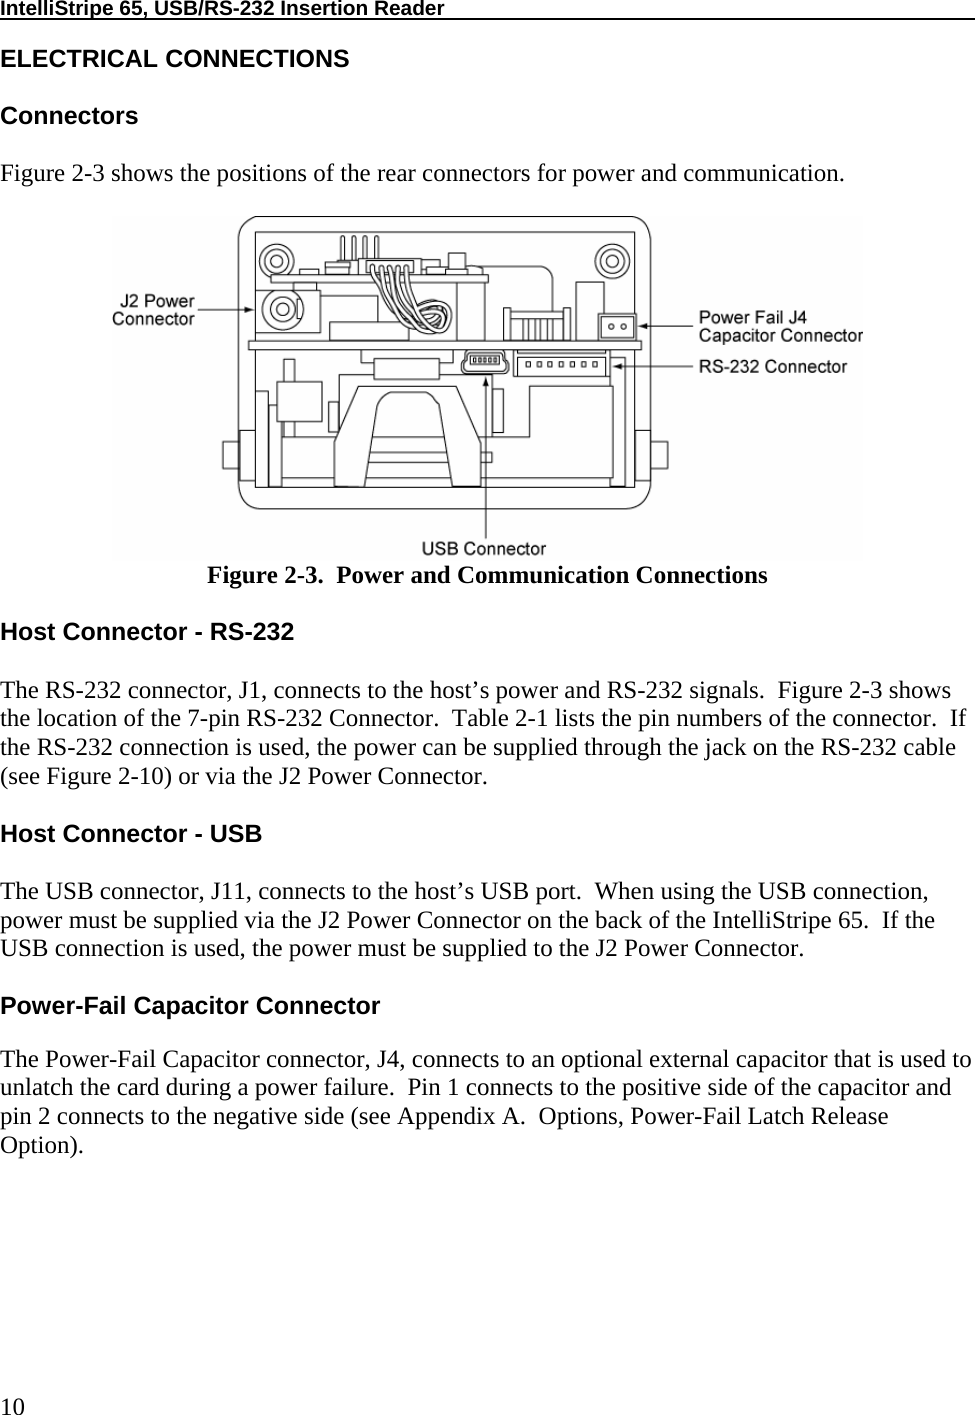 IntelliStripe 65, USB/RS-232 Insertion Reader     10 ELECTRICAL CONNECTIONS  Connectors  Figure 2-3 shows the positions of the rear connectors for power and communication.   Figure 2-3.  Power and Communication Connections  Host Connector - RS-232  The RS-232 connector, J1, connects to the host’s power and RS-232 signals.  Figure 2-3 shows the location of the 7-pin RS-232 Connector.  Table 2-1 lists the pin numbers of the connector.  If the RS-232 connection is used, the power can be supplied through the jack on the RS-232 cable (see Figure 2-10) or via the J2 Power Connector.  Host Connector - USB  The USB connector, J11, connects to the host’s USB port.  When using the USB connection, power must be supplied via the J2 Power Connector on the back of the IntelliStripe 65.  If the USB connection is used, the power must be supplied to the J2 Power Connector.  Power-Fail Capacitor Connector  The Power-Fail Capacitor connector, J4, connects to an optional external capacitor that is used to unlatch the card during a power failure.  Pin 1 connects to the positive side of the capacitor and pin 2 connects to the negative side (see Appendix A.  Options, Power-Fail Latch Release Option).   